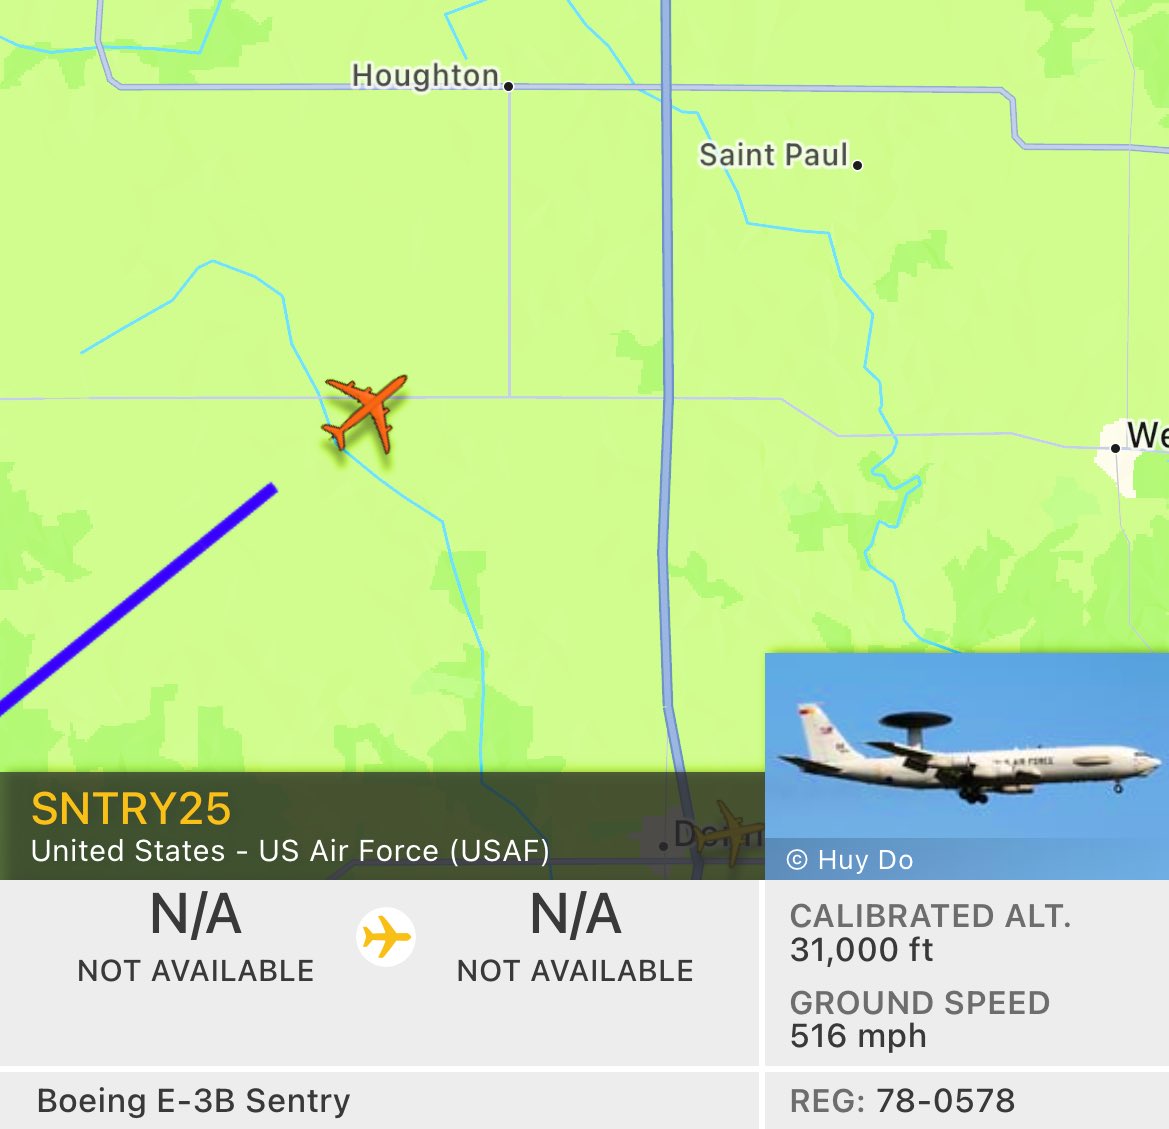 US Air Force Sentry surveillance aircraft appears to be en route to the scene